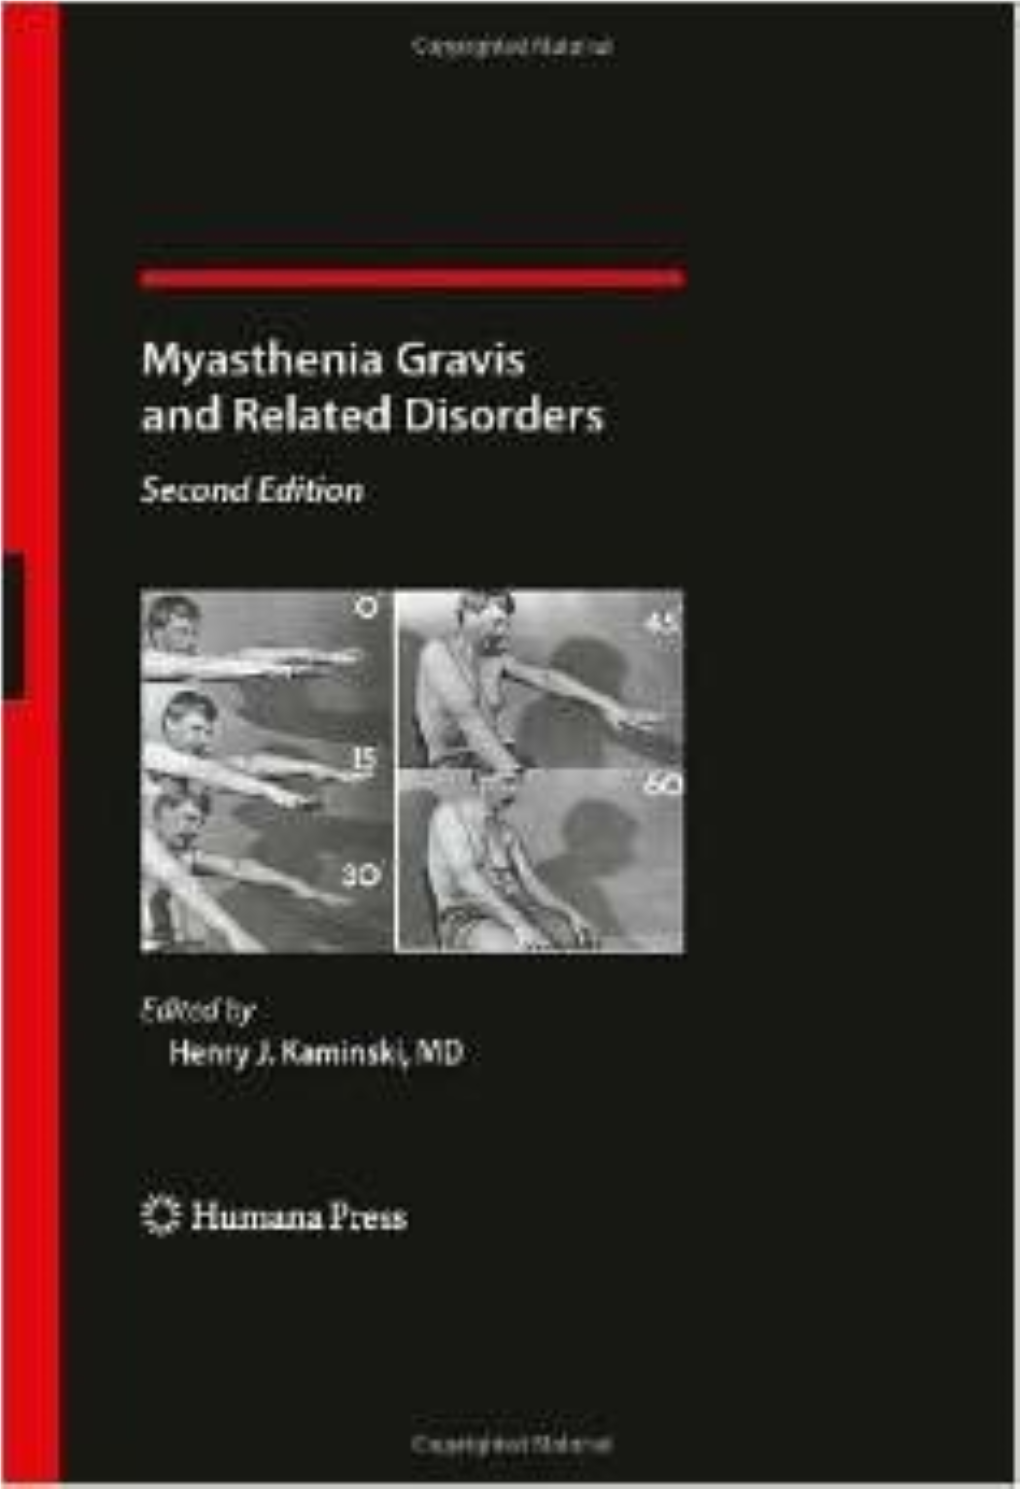 Current Clinical Neurology Myasthenia Gravis and Related Disorders Edited By: H.J